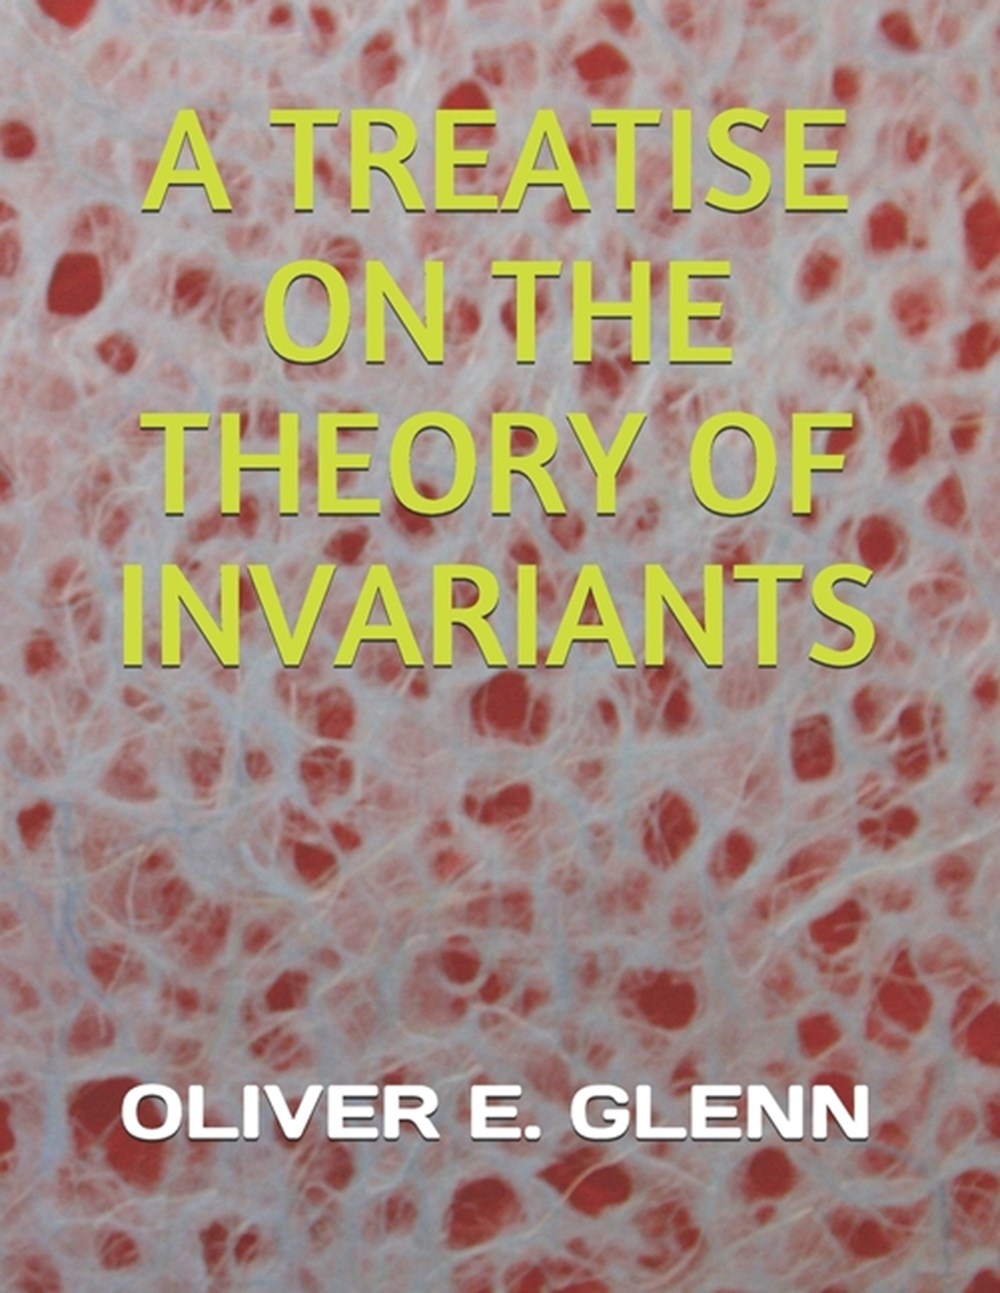 Treatise on the Theory of Invariants